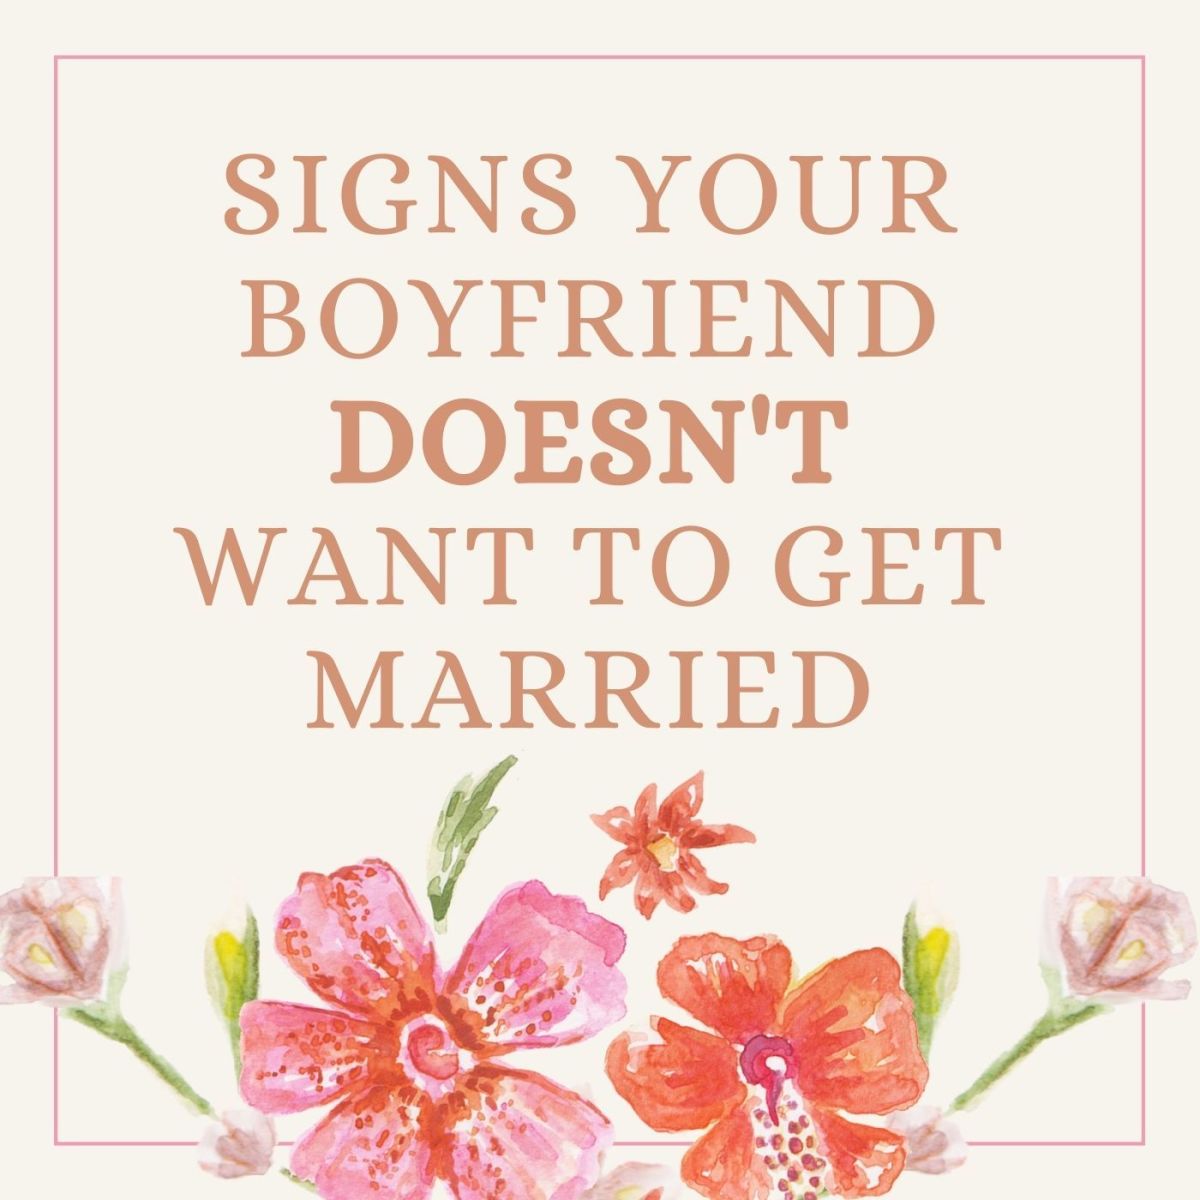 7 Signs Your Boyfriend Doesn't Want to Get Married